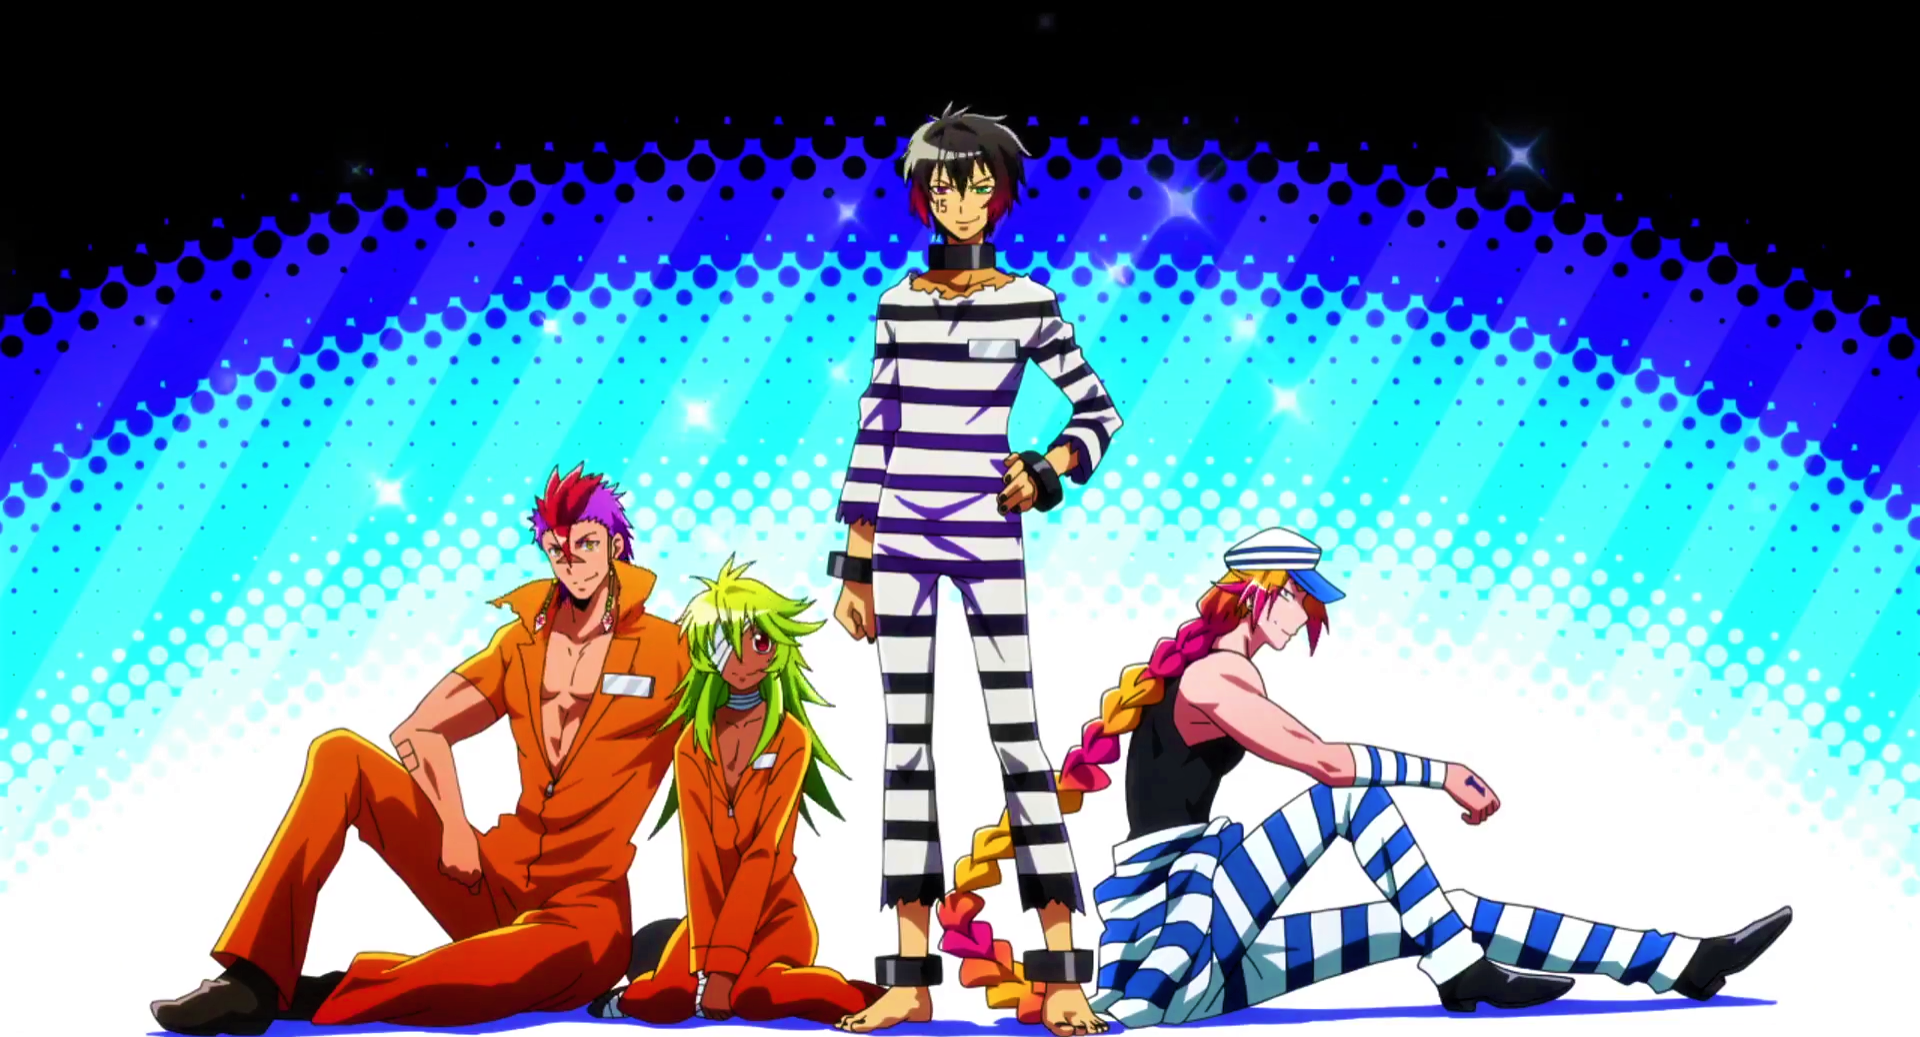 Nanbaka Team by ImReallyGay - Image Abyss